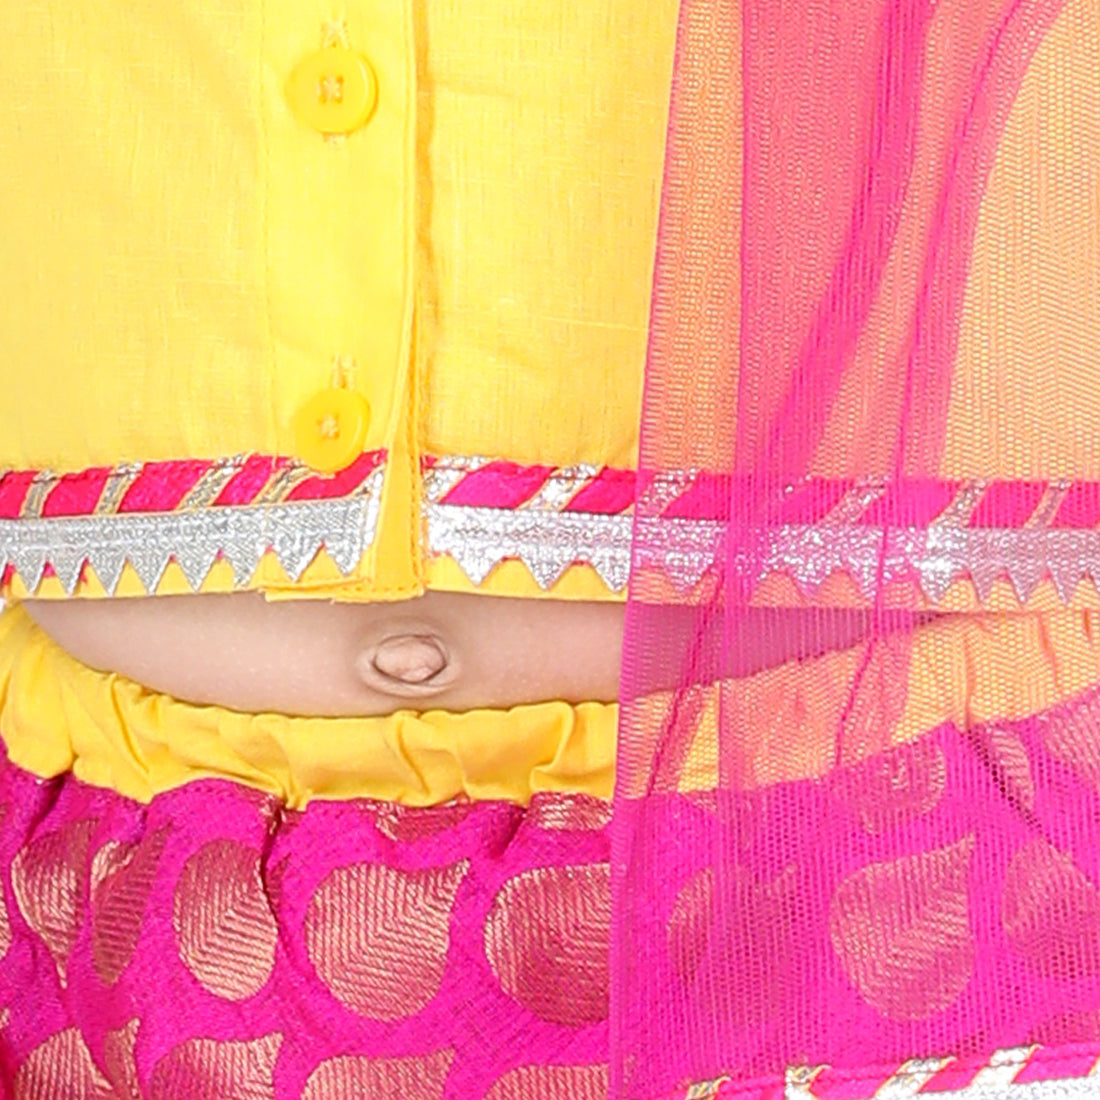 BownBee Sibling Cotton Kurta with Jacket and Front Open Cotton Top With Jacquard Lehenga-Yellow